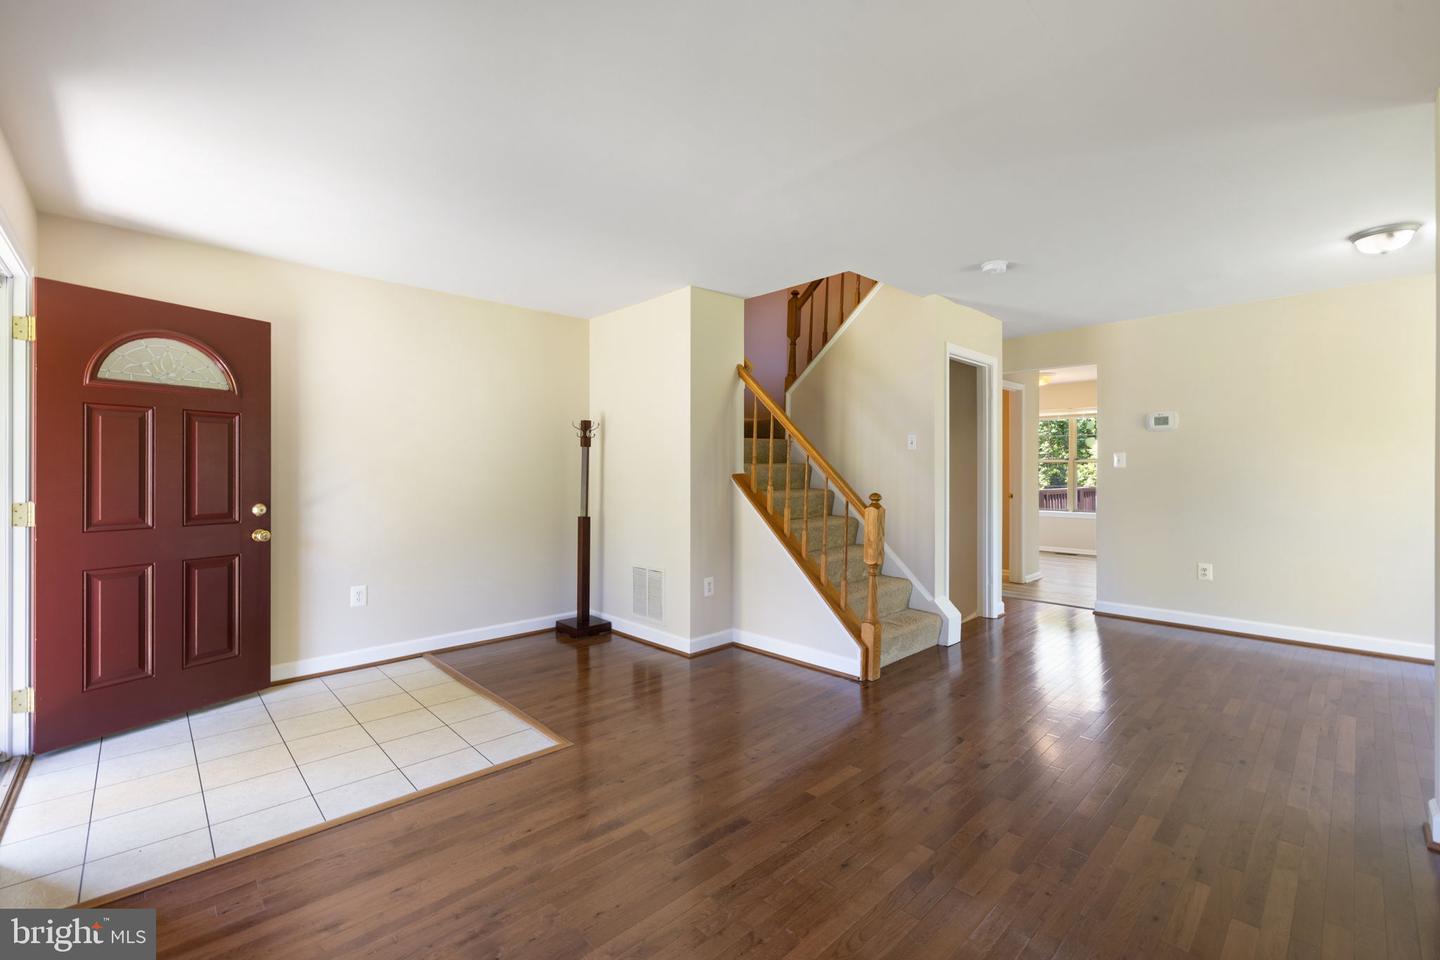 Photo 8 of 57 of 6934 Hovingham Ct townhome